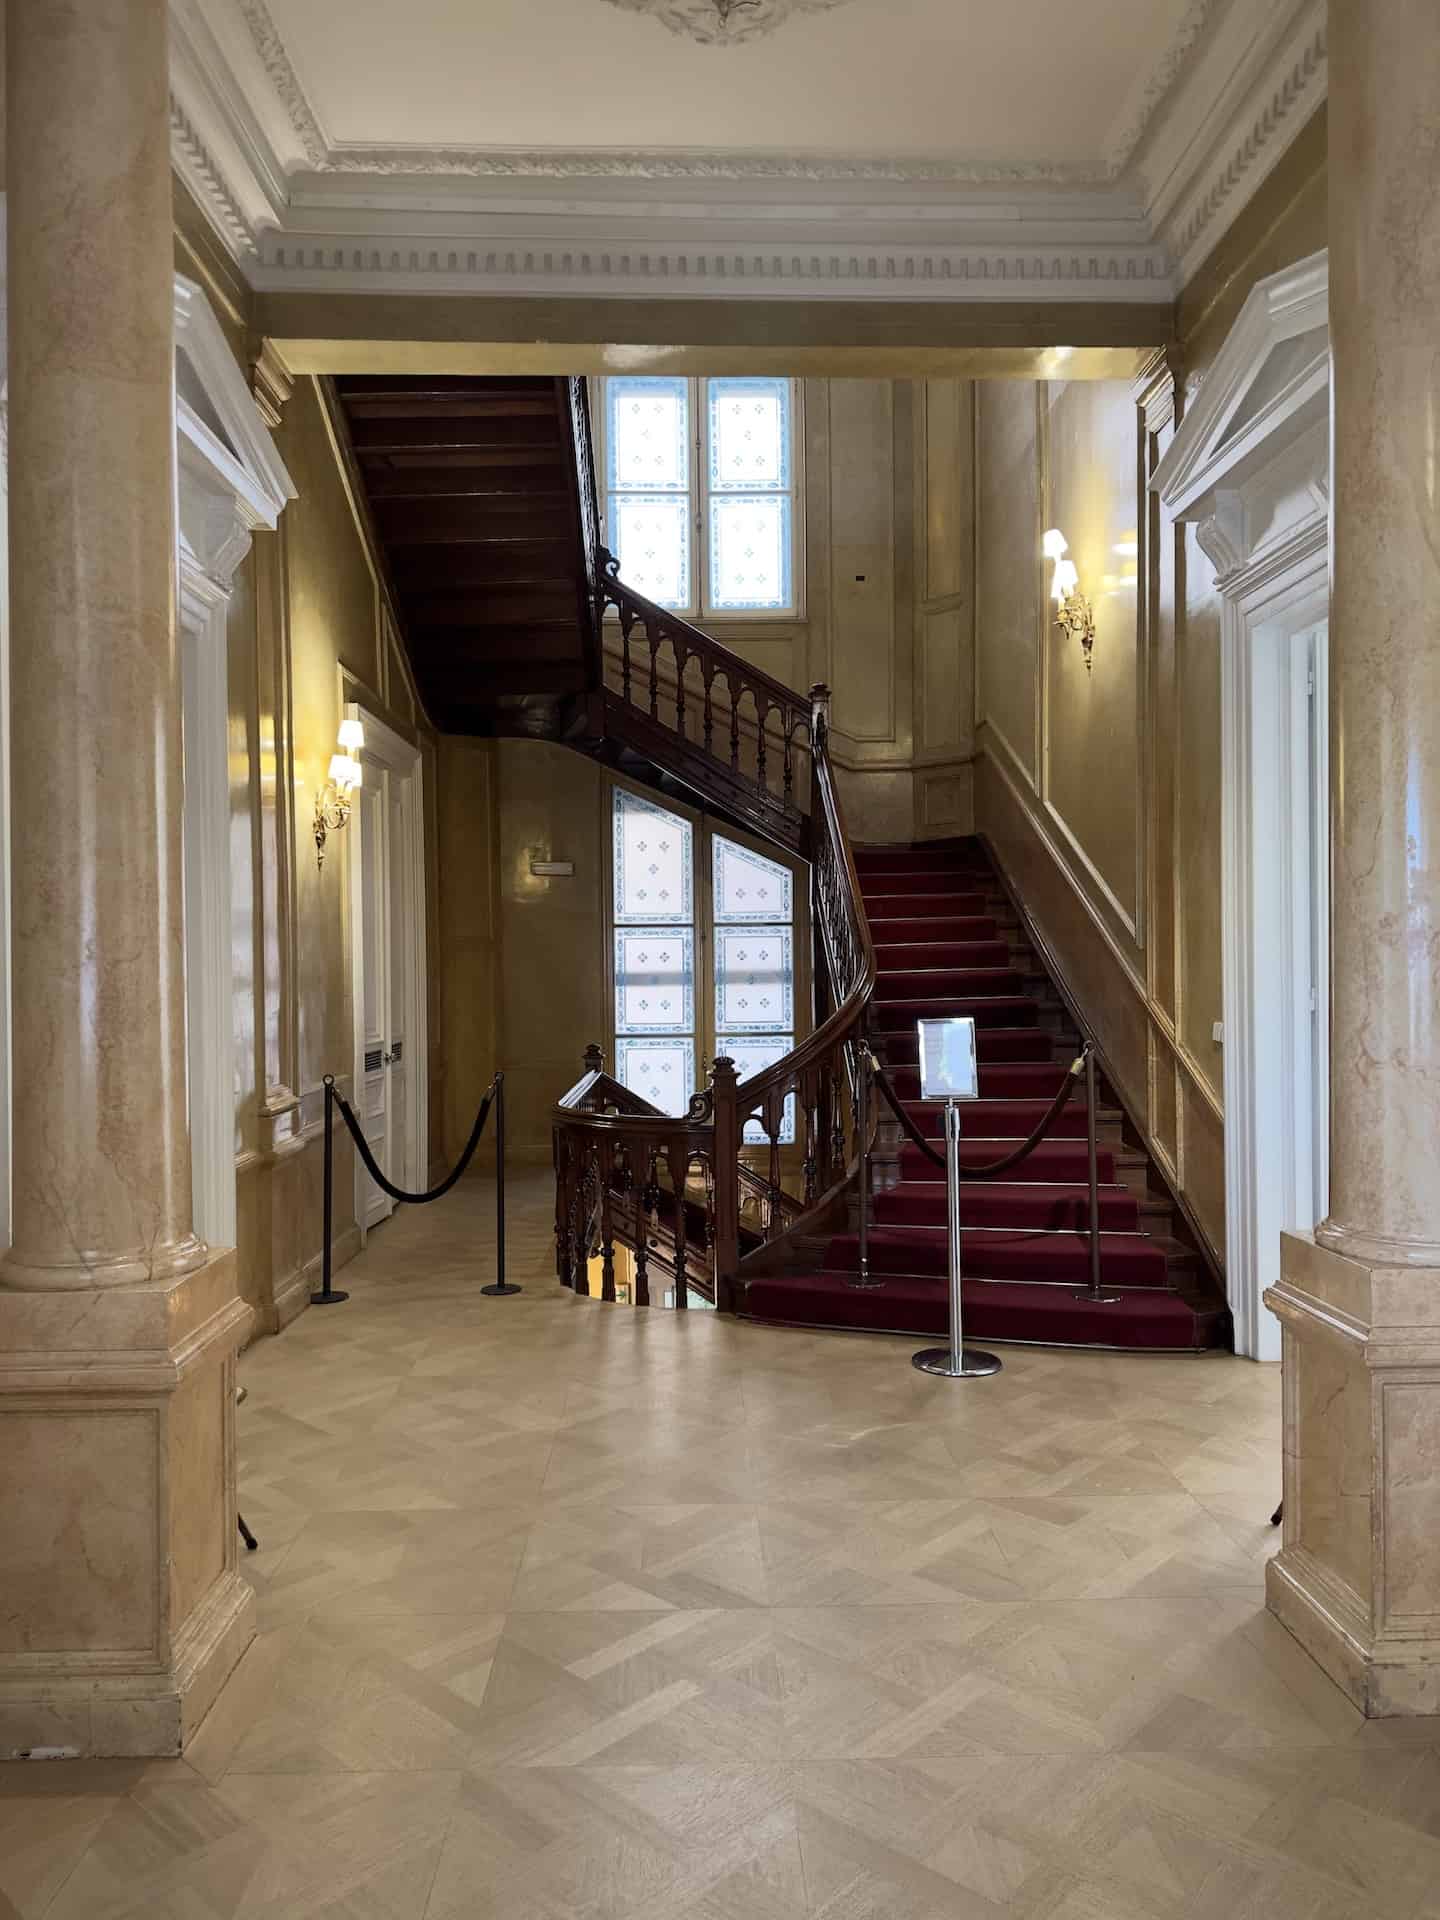 Grand staircase in the Stathatos Mansion at the Museum of Cycladic Art in Athens, Greece